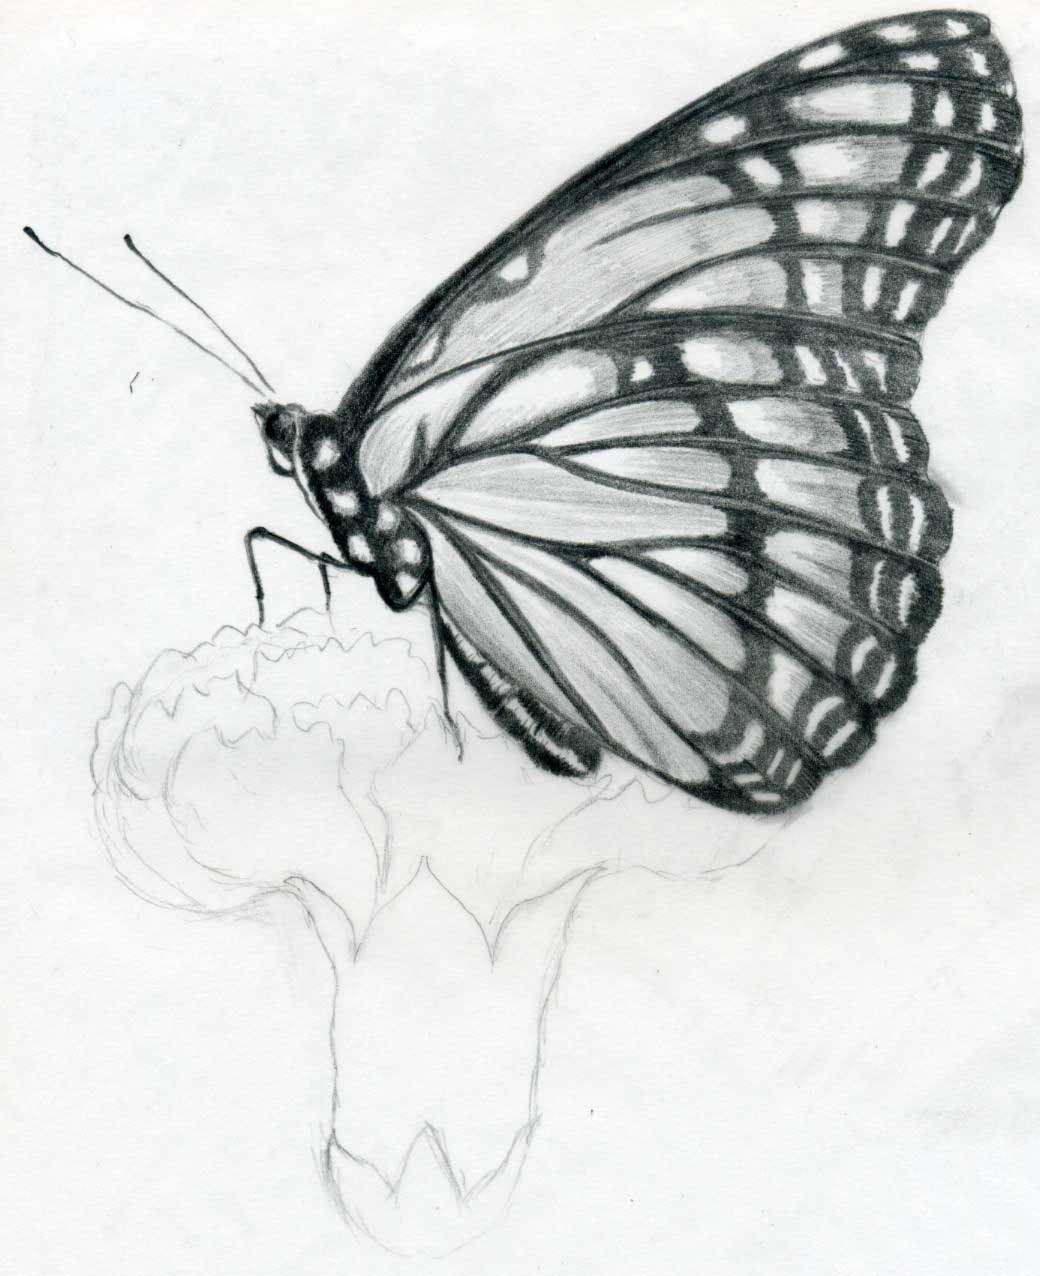 http://www.easy-drawings-and-sketches.com/images/butterfly-pencil-drawings06.jpg